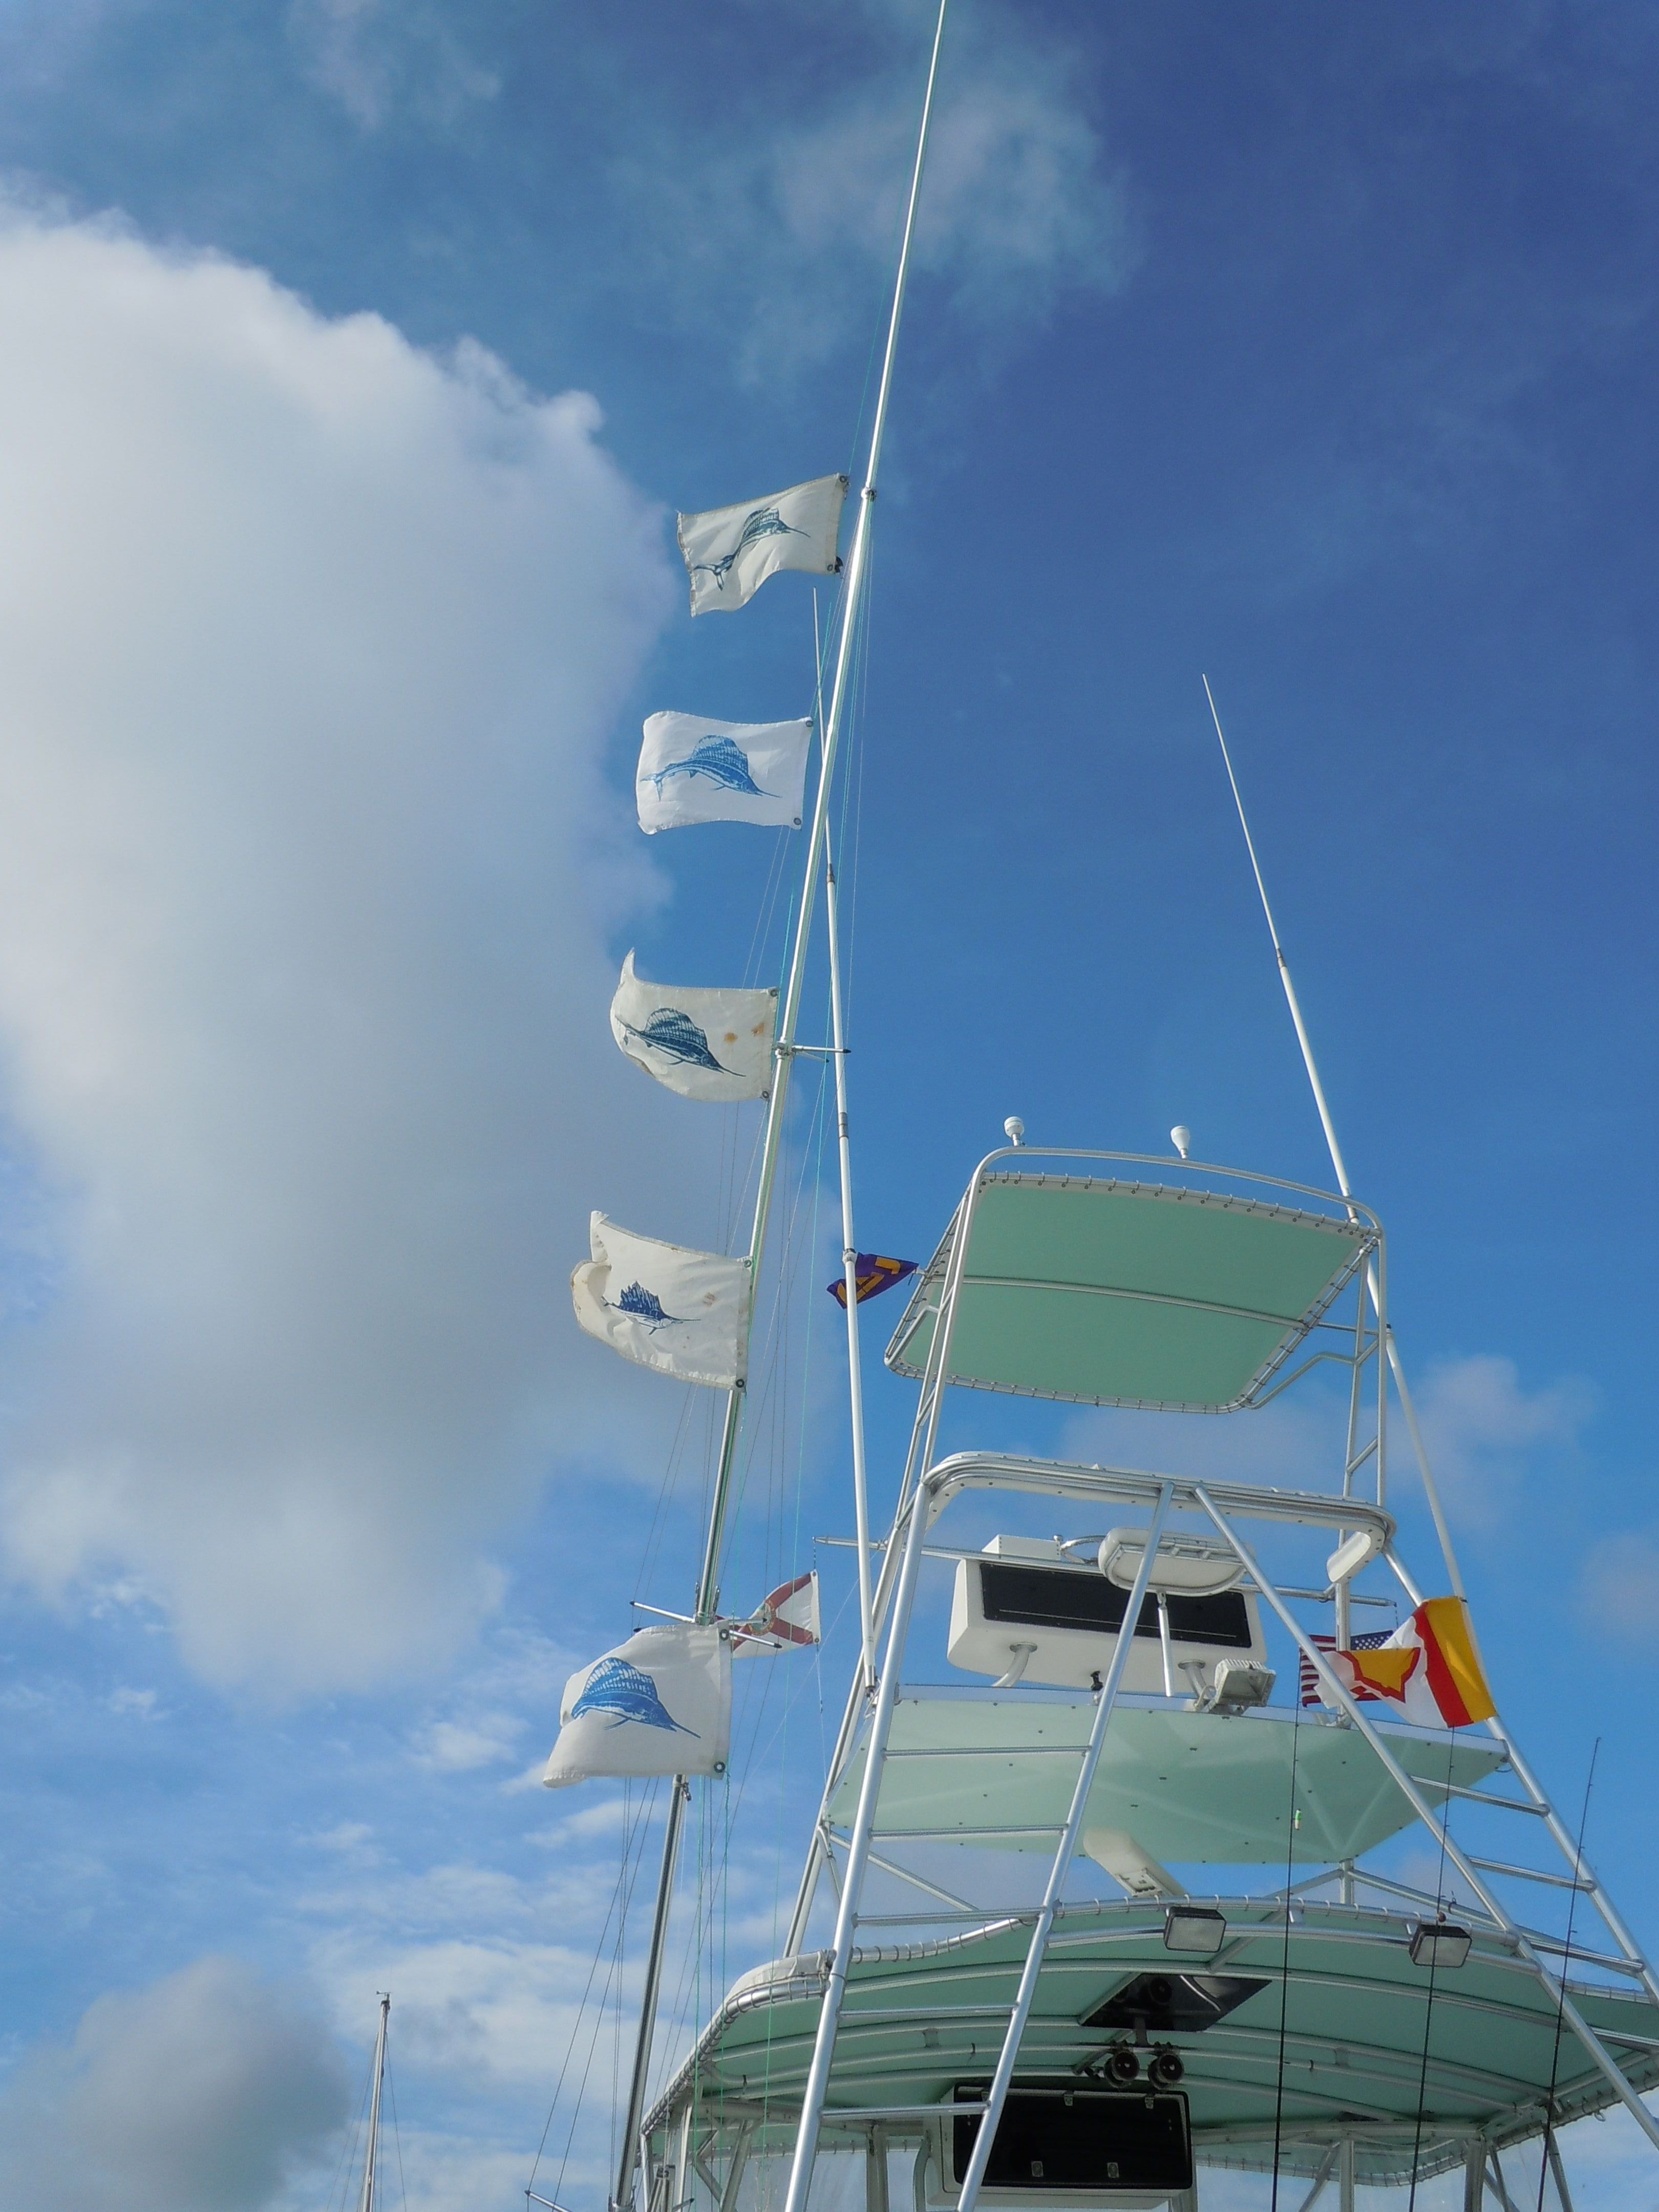 5 catch and release flags flying on the southpaw sport fisher